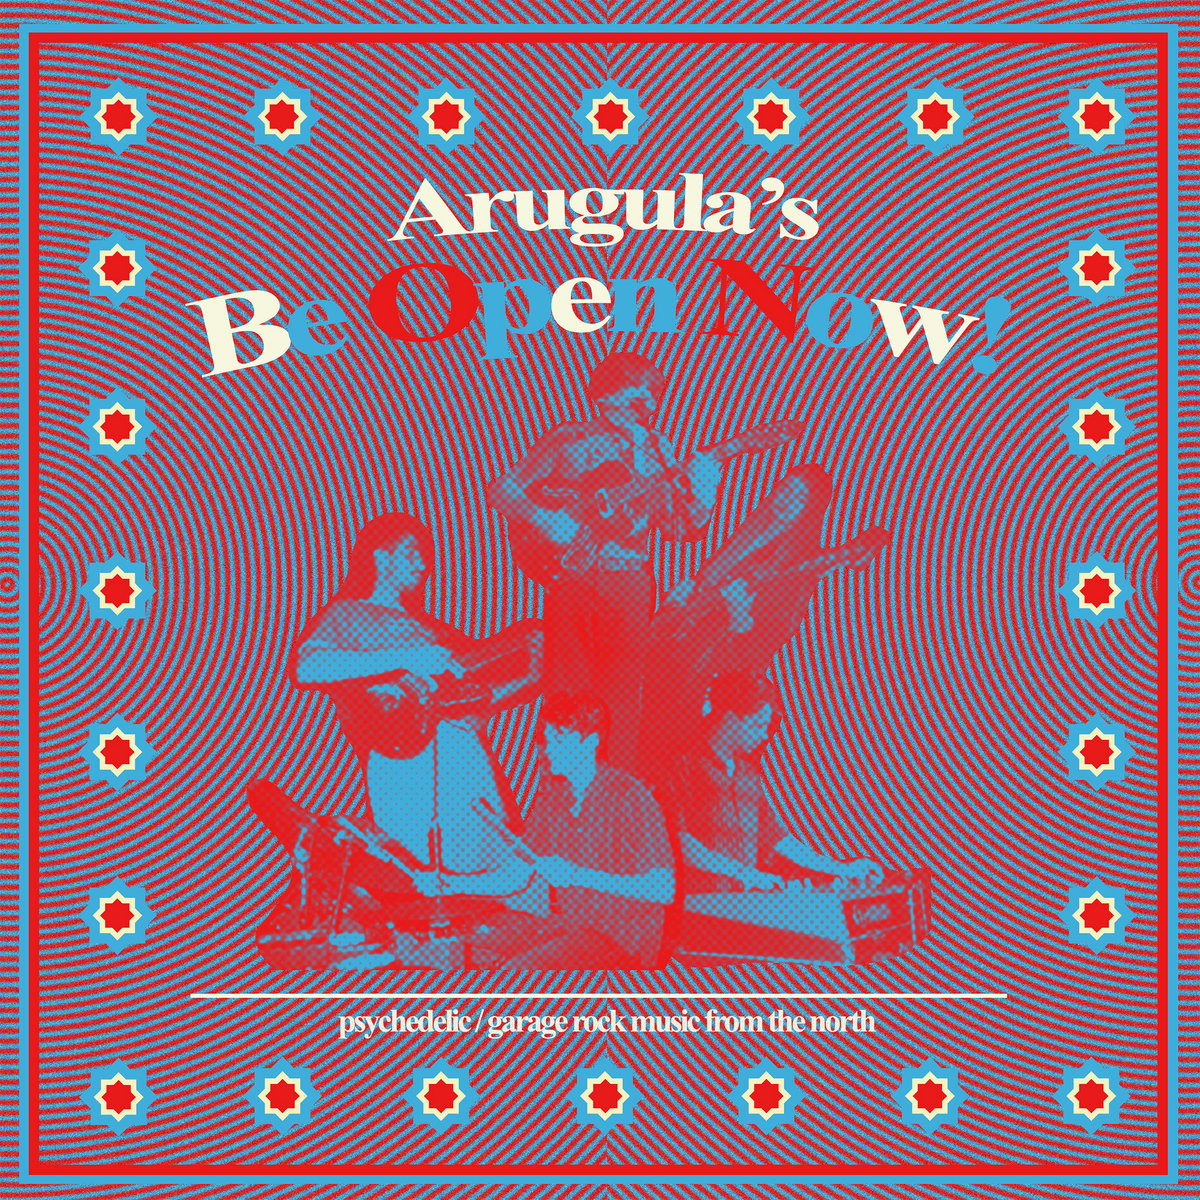 New Music: ‘Be Open Now!’ by Arugula